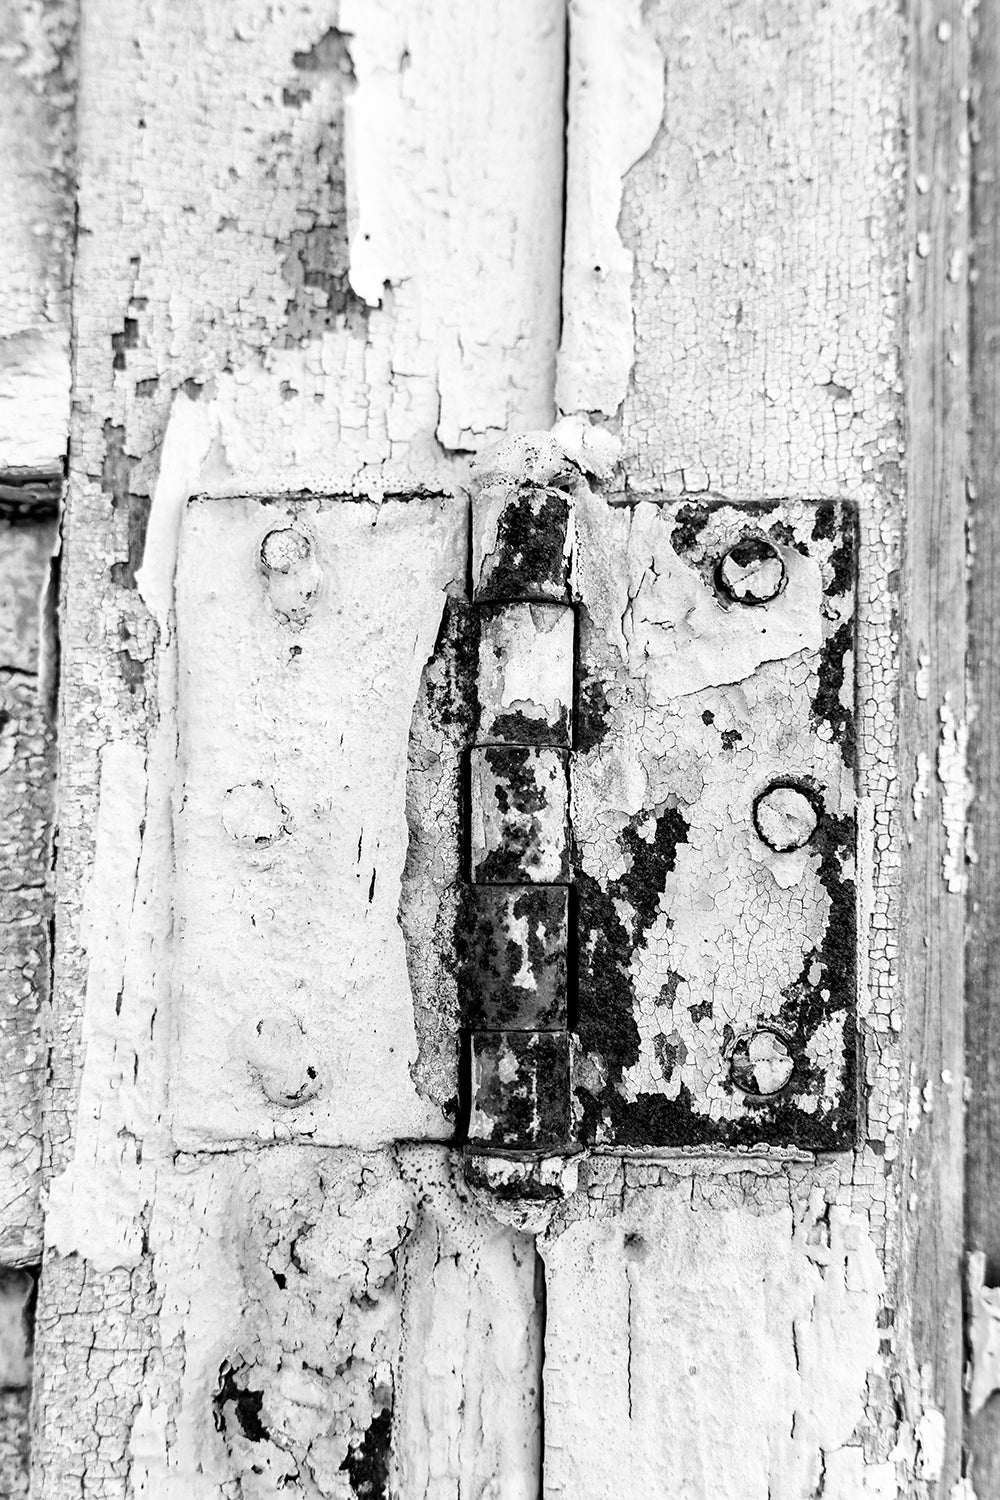 Rusty Door Hinge on an Abandoned Building: Black and White Photograph by Keith Dotson. Buy a fine art print here.